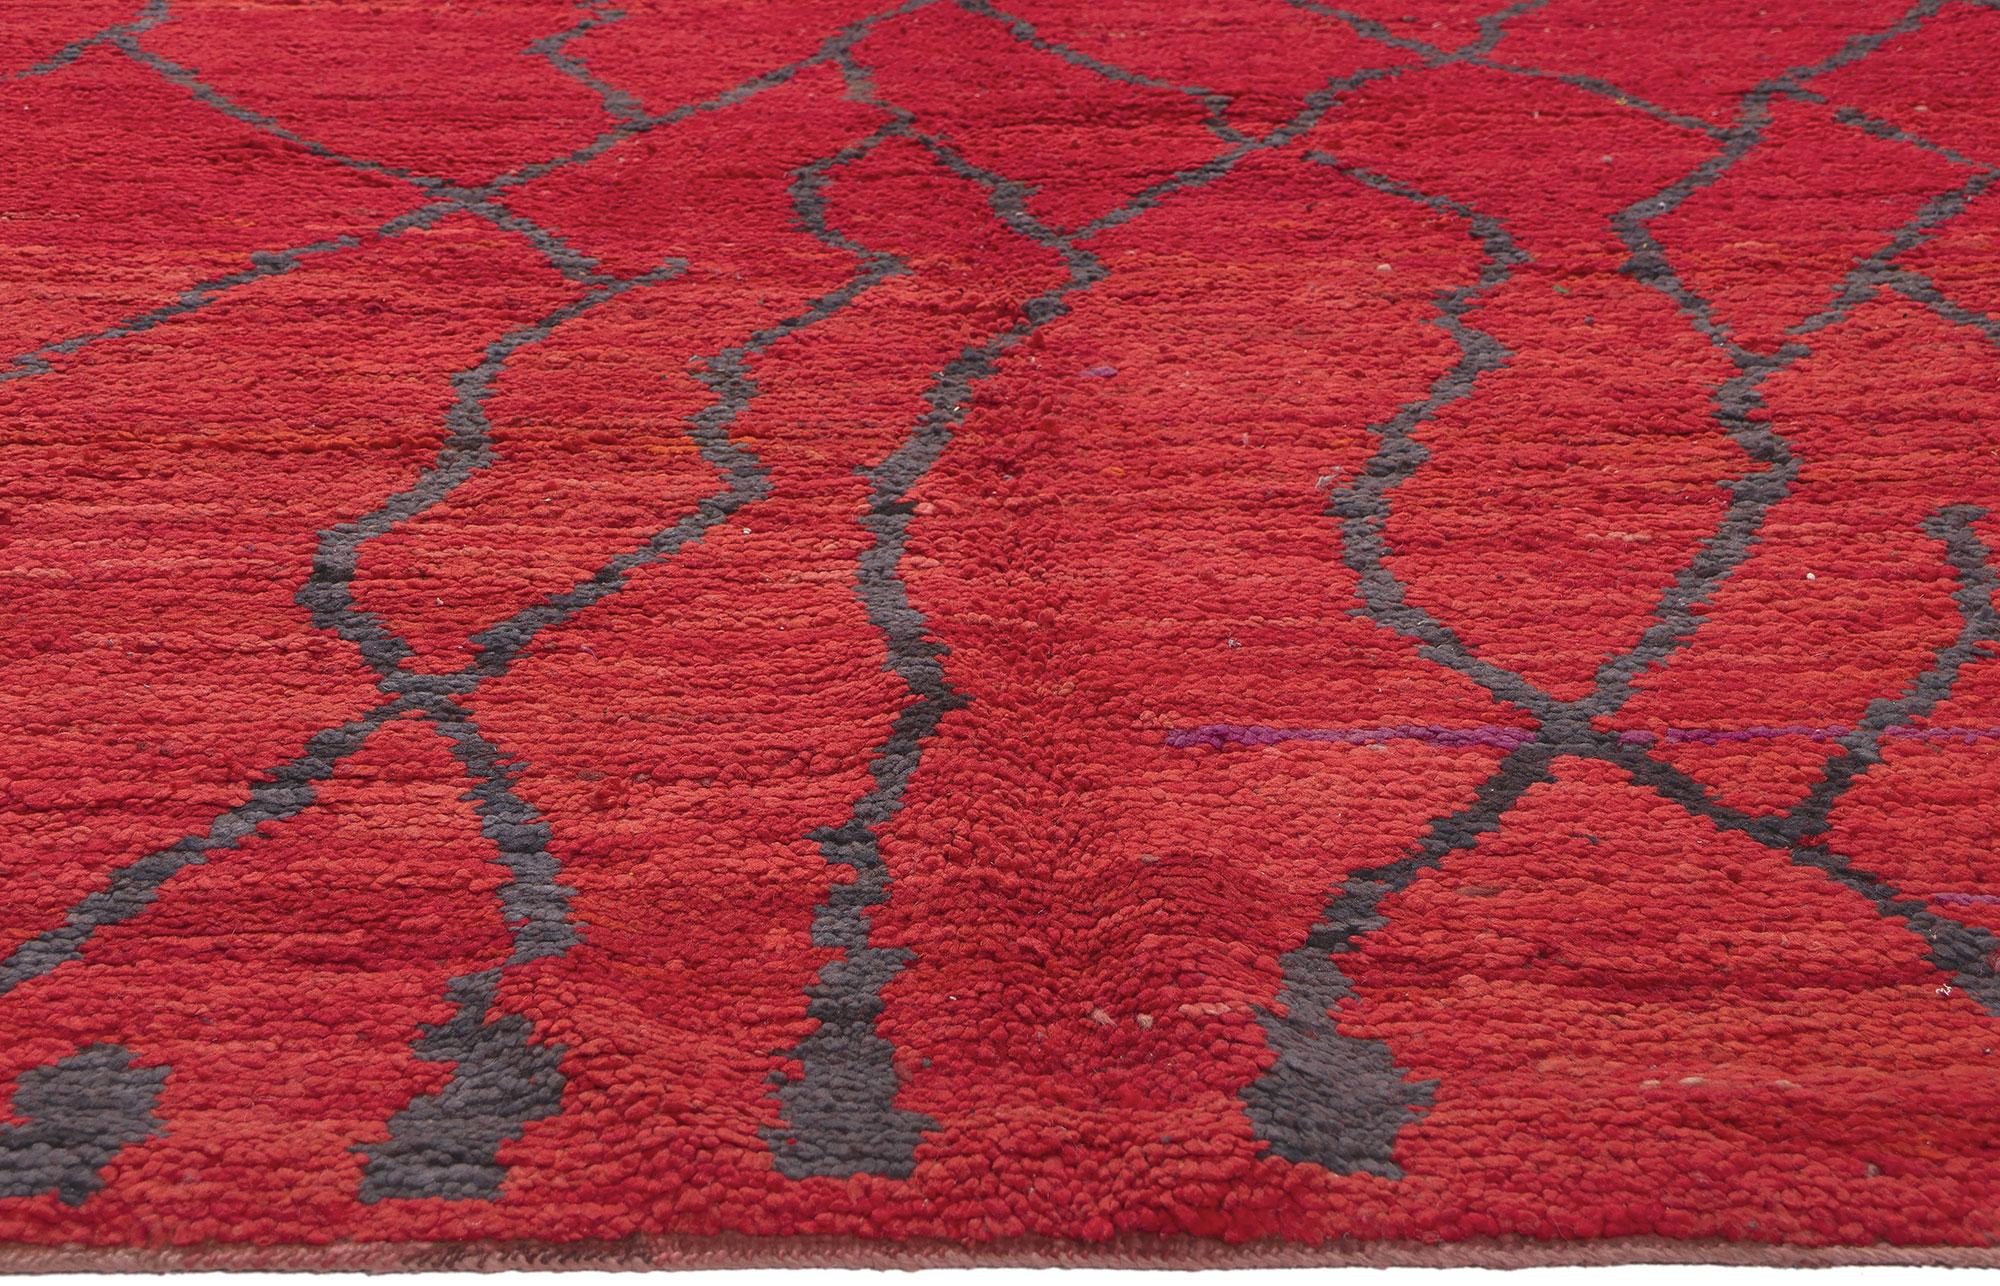 Vintage Red Talsint Moroccan Rug, Cozy Nomad Meets Maximalist Style In Good Condition For Sale In Dallas, TX